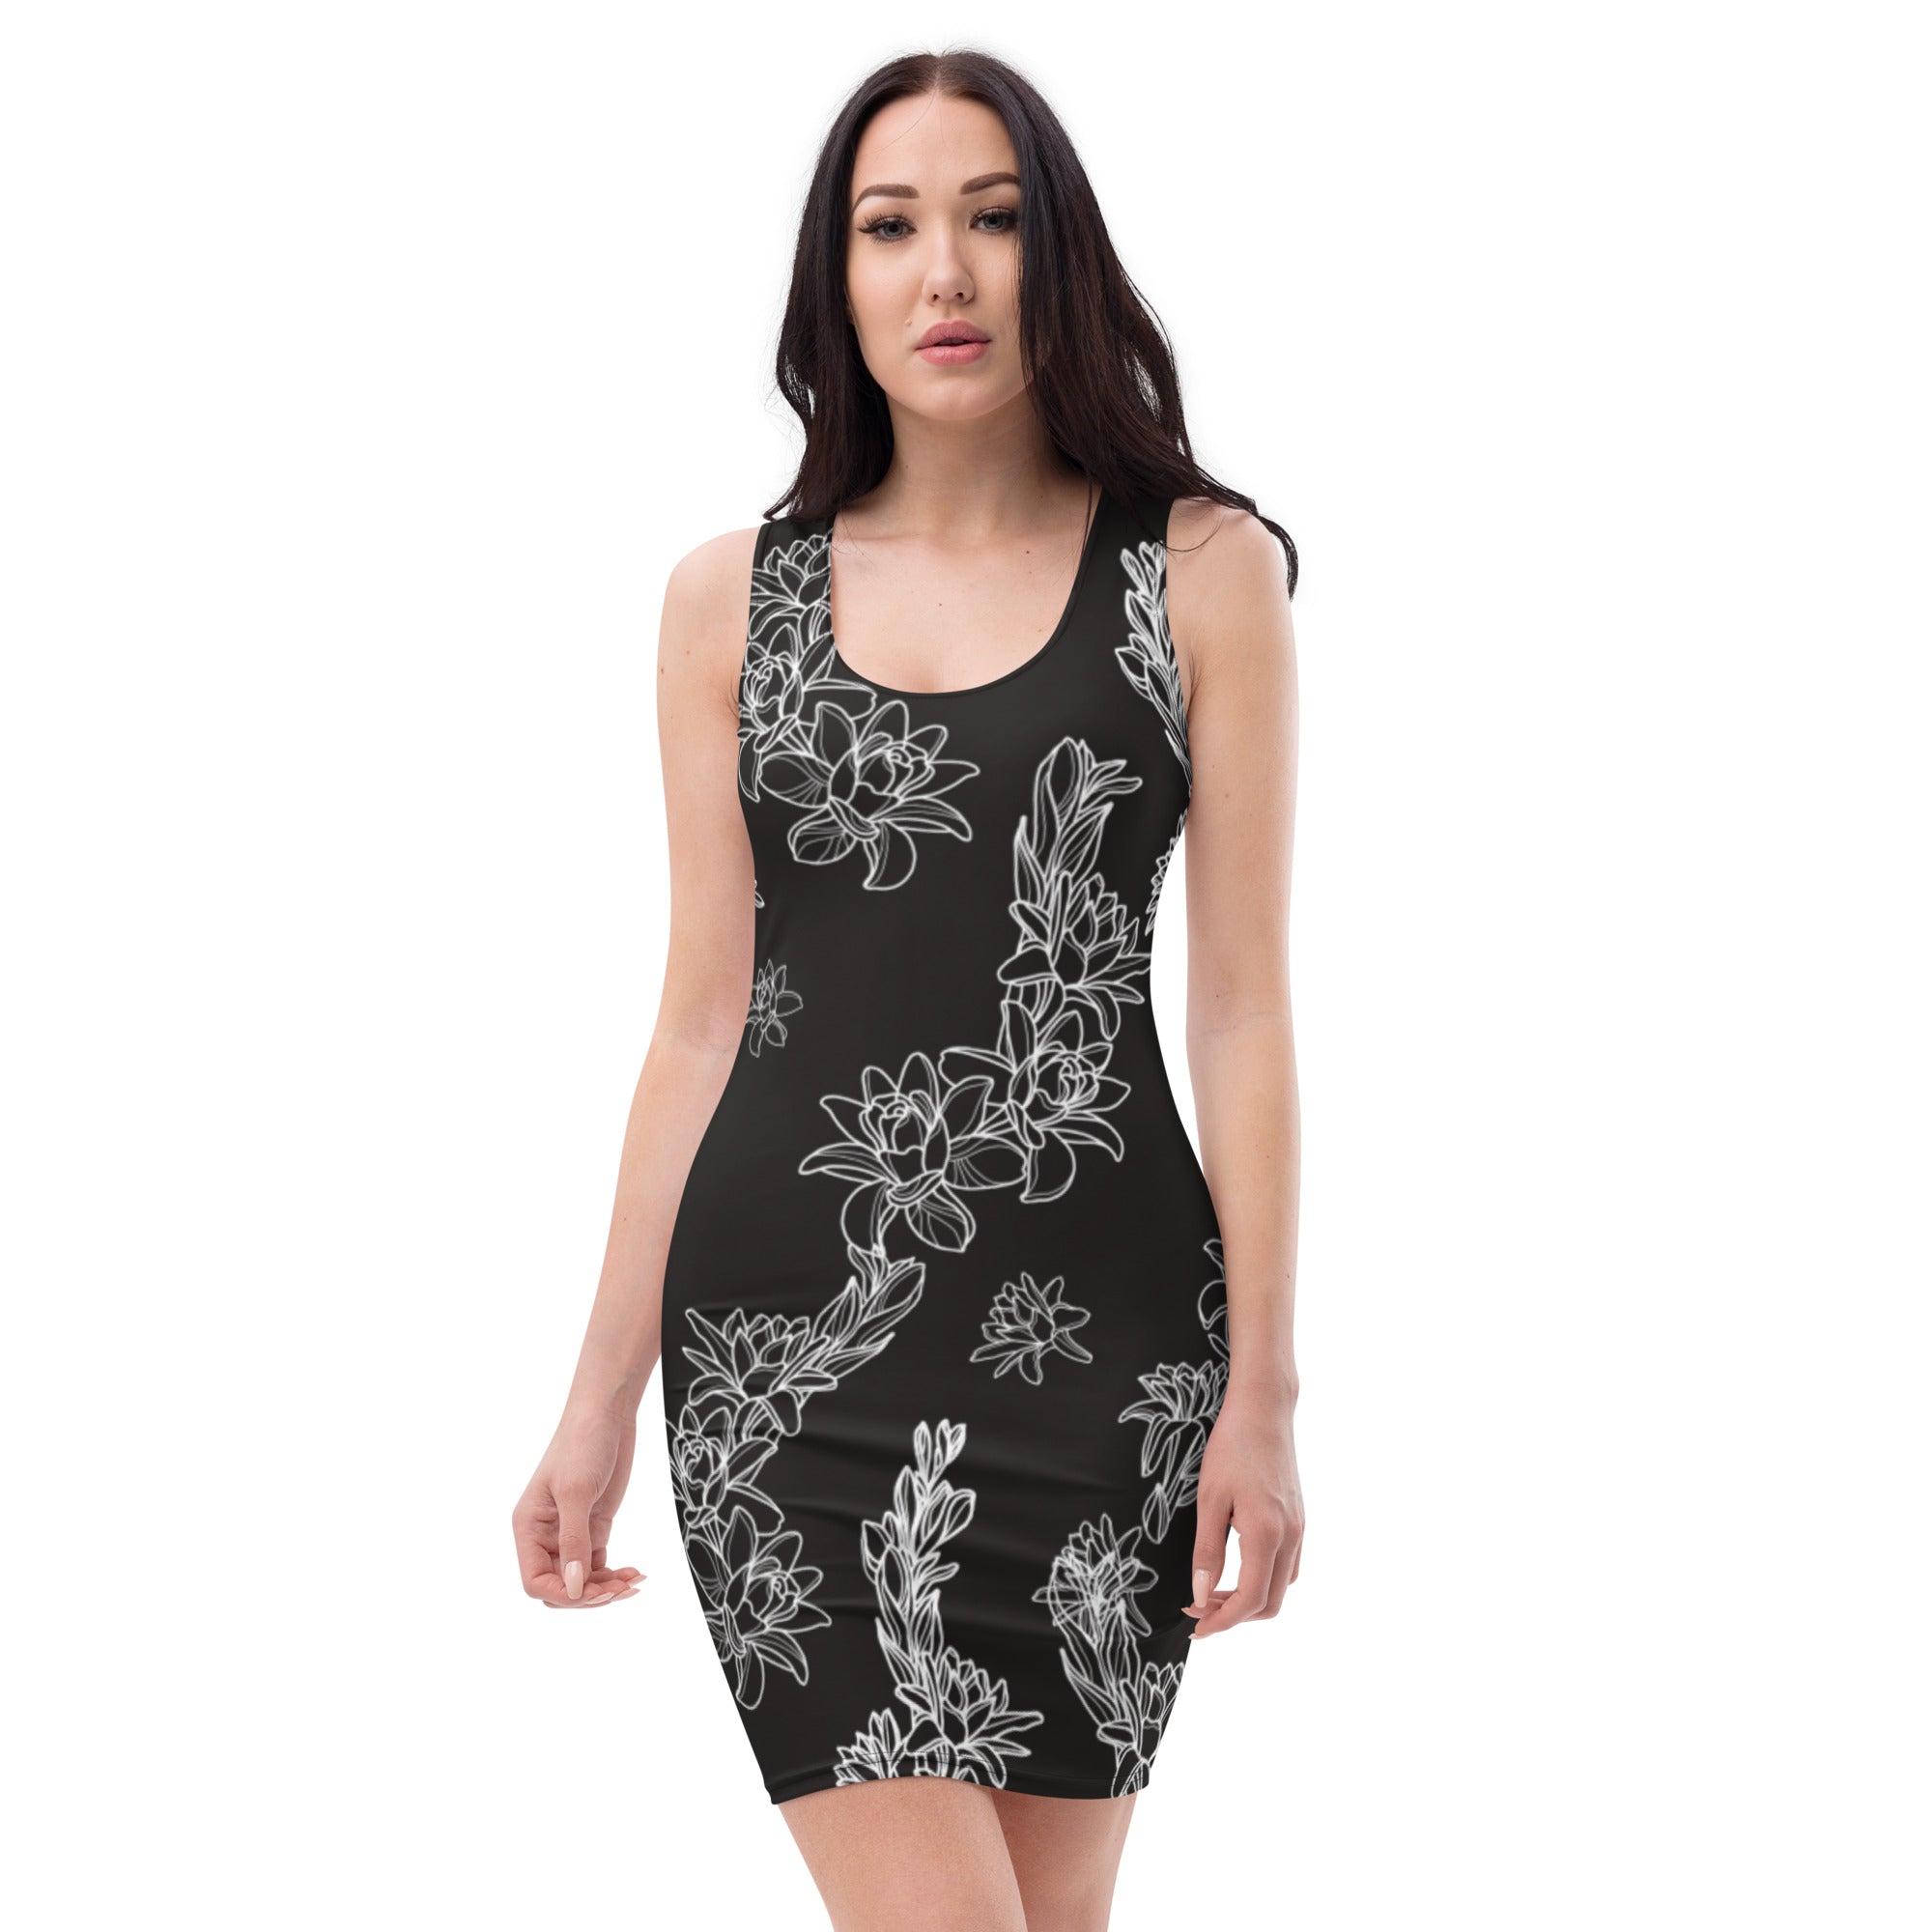 Tuberose Fitted Dress - Black and White